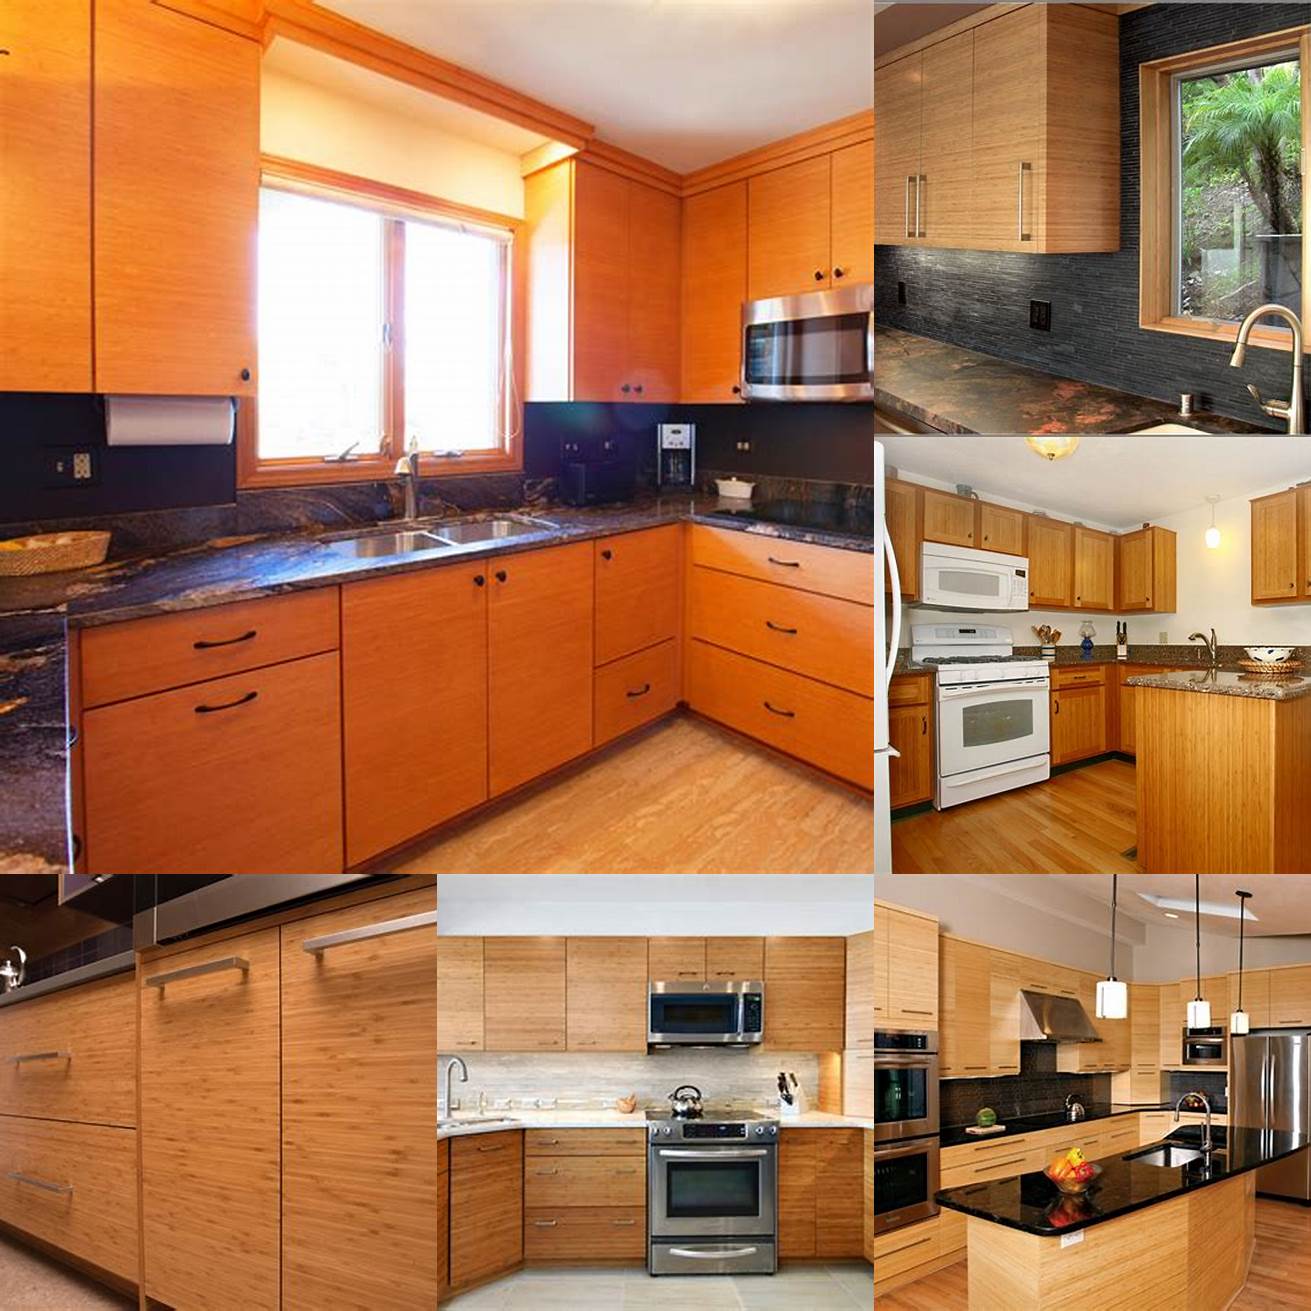 Dark-stained bamboo kitchen cabinets